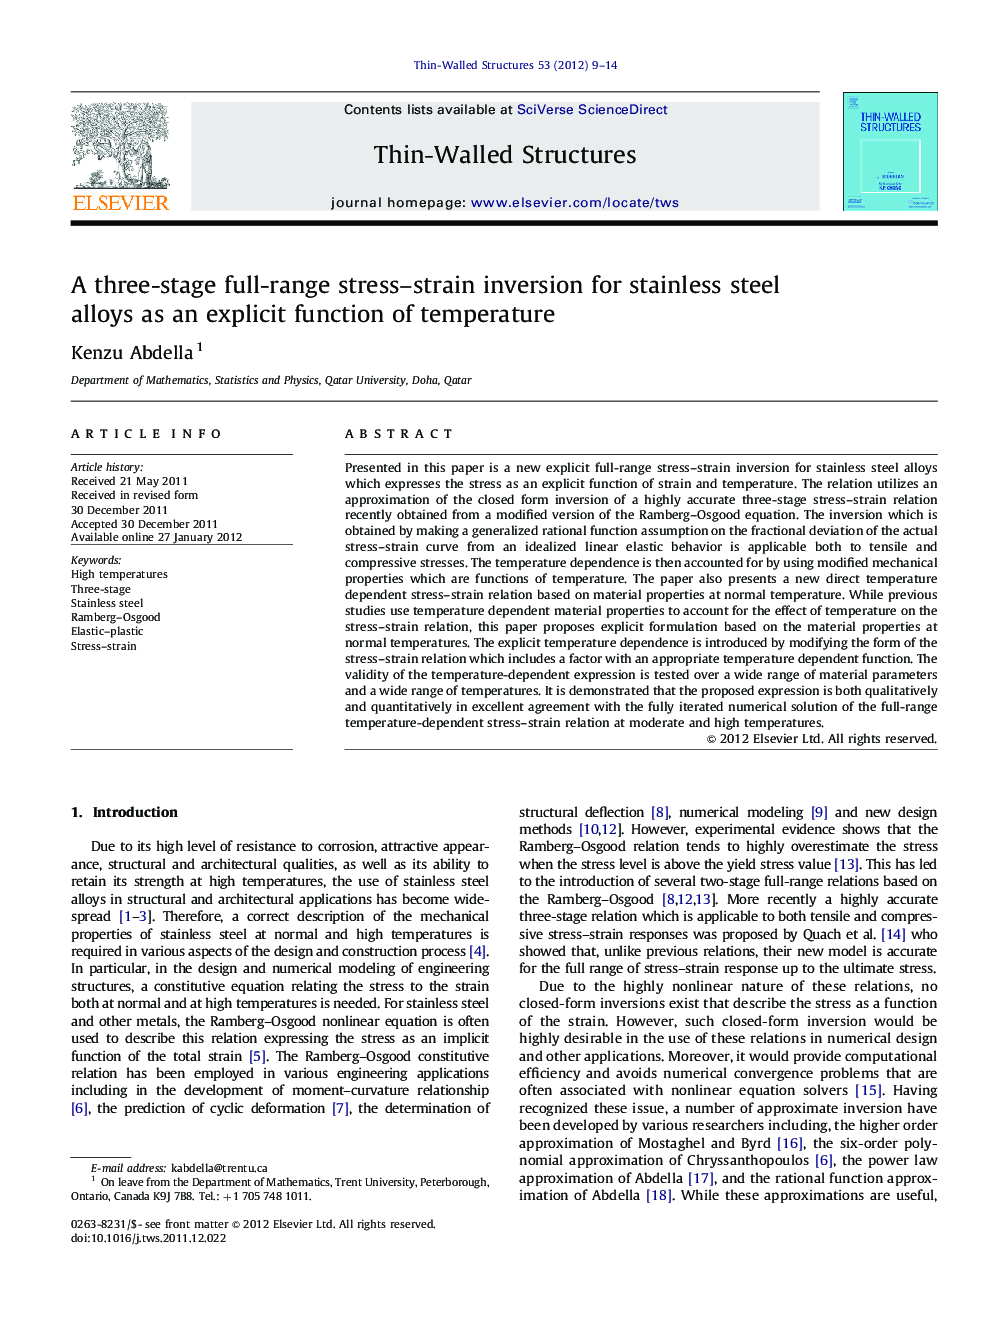 A three-stage full-range stress–strain inversion for stainless steel alloys as an explicit function of temperature